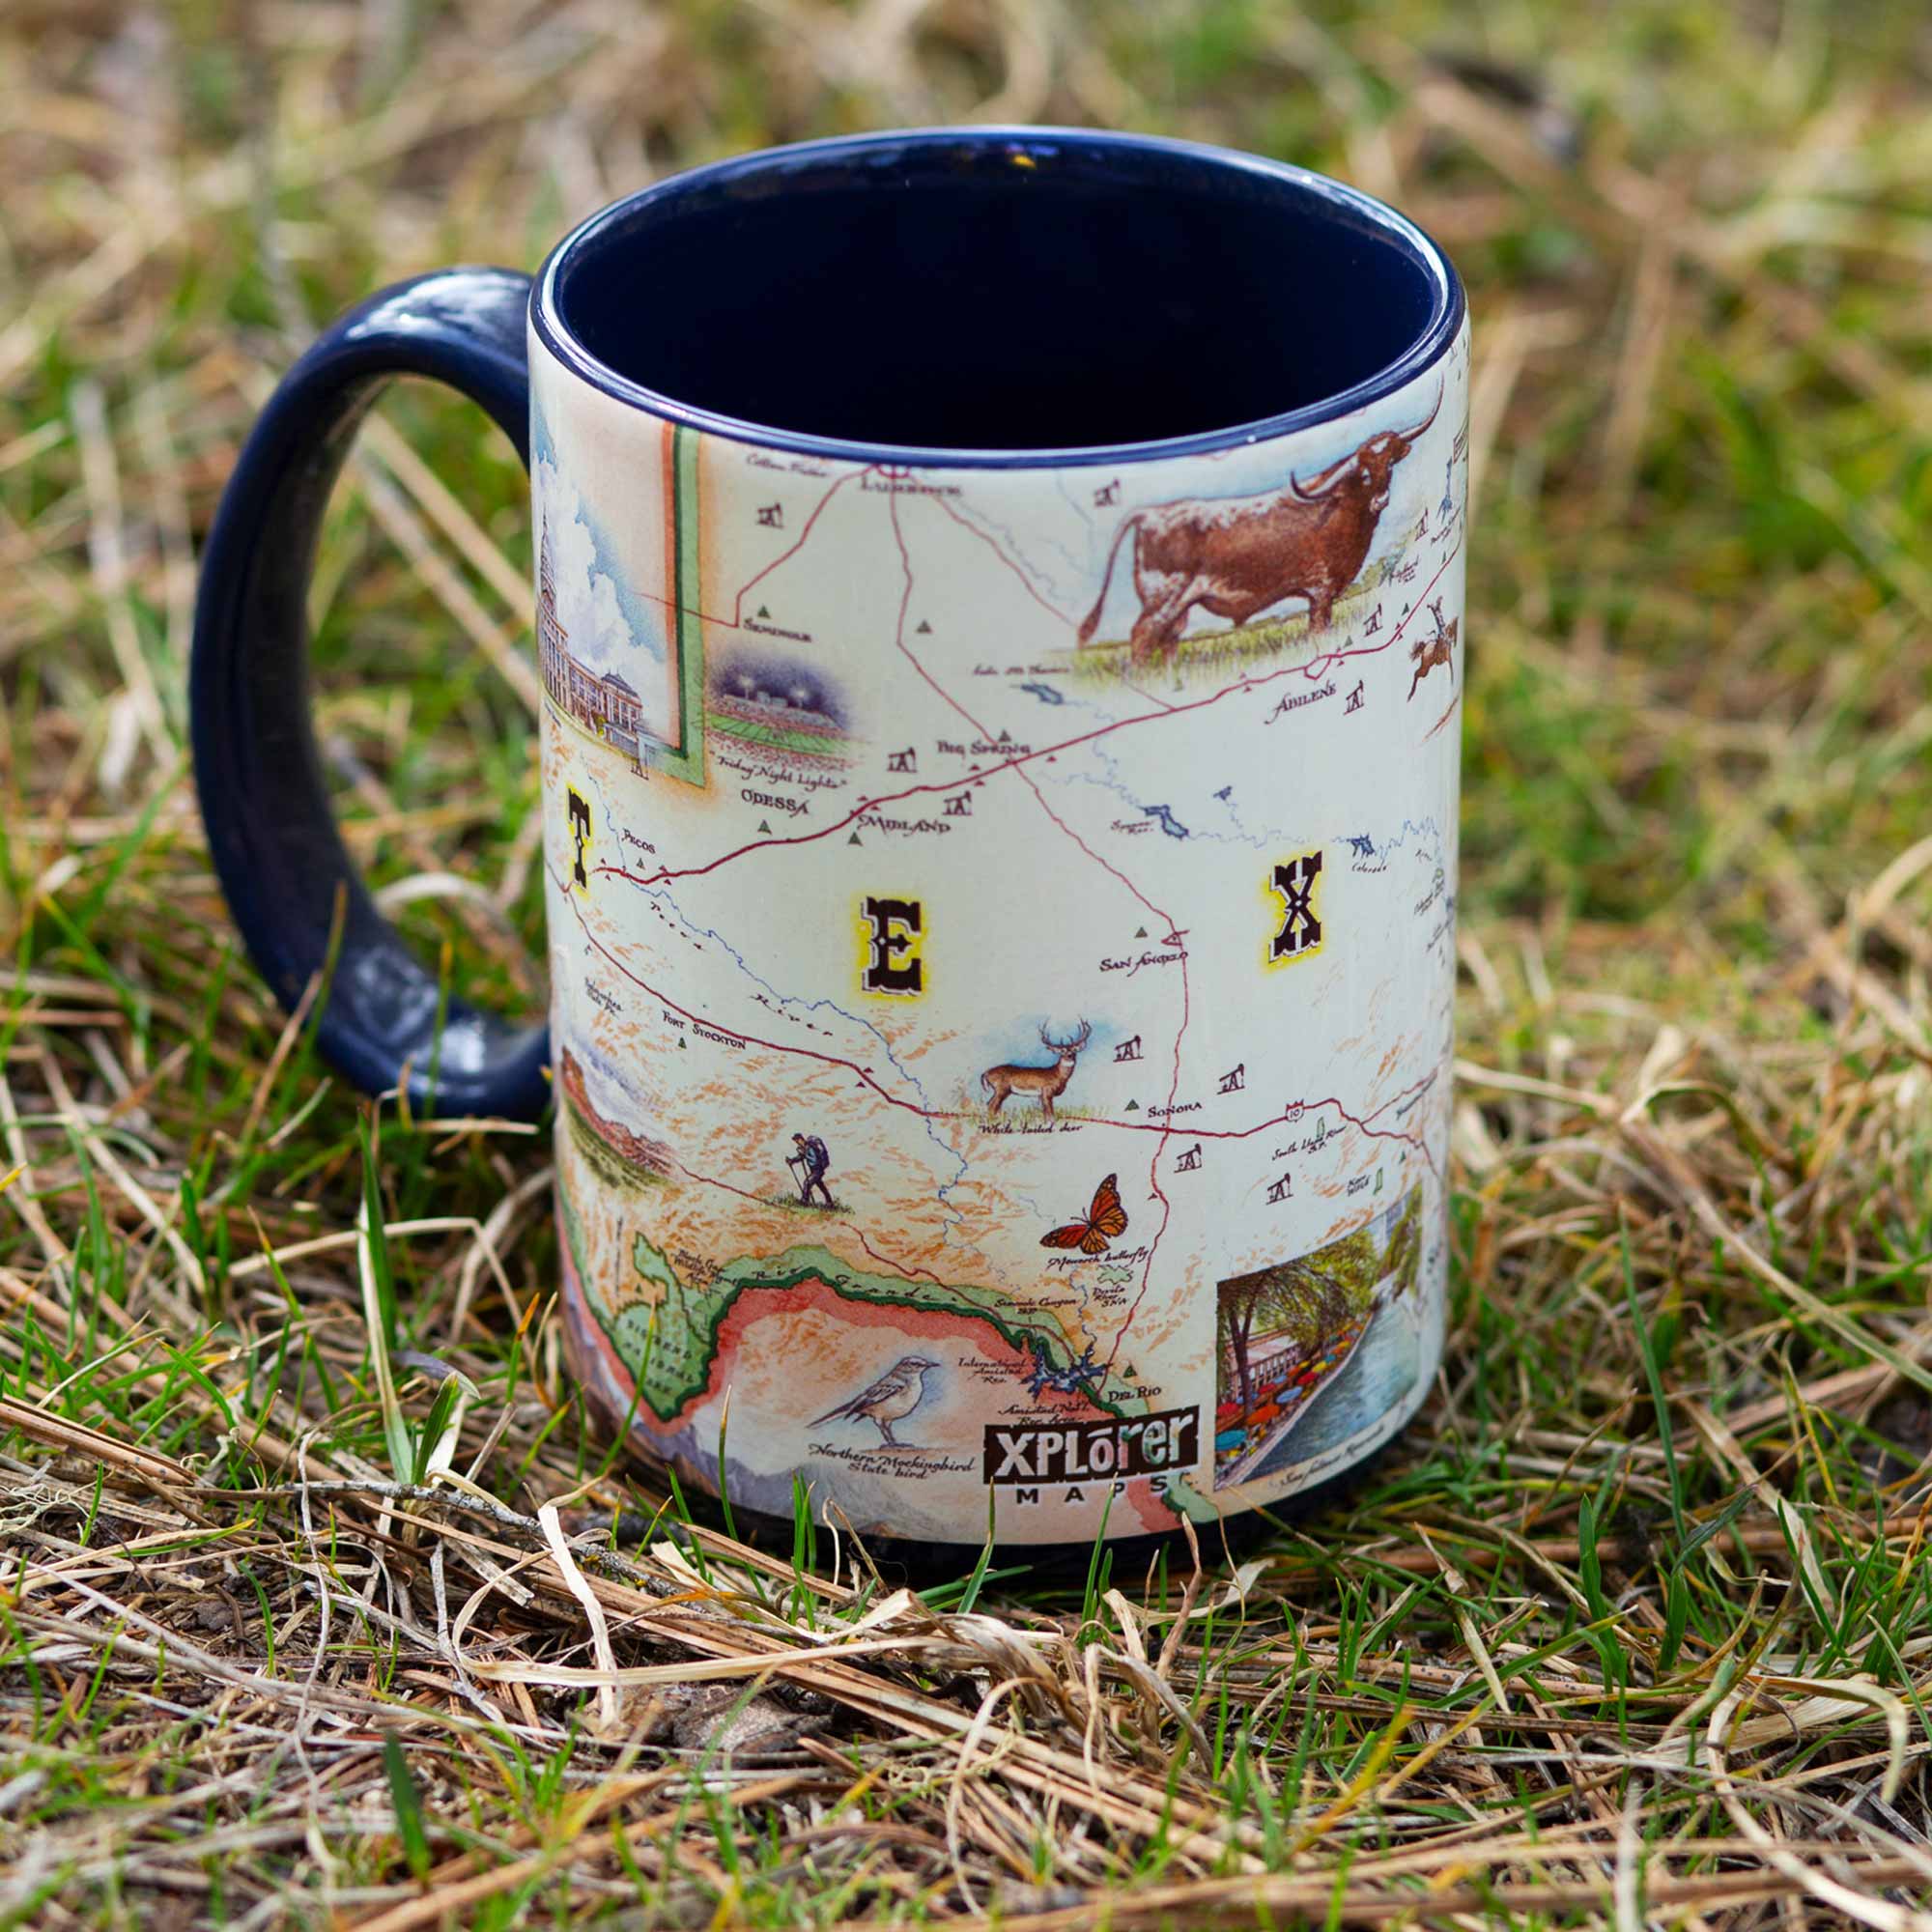 Blue 16 oz Texas State Map Ceramic Mug sitting in grass. The map features illustrations of as the Alamo, San Antonio Riverwalk, and Guadalupe National Park. Flora and fauna include Venus flytraps, longhorns, Monarch butterflies, and armadillos.